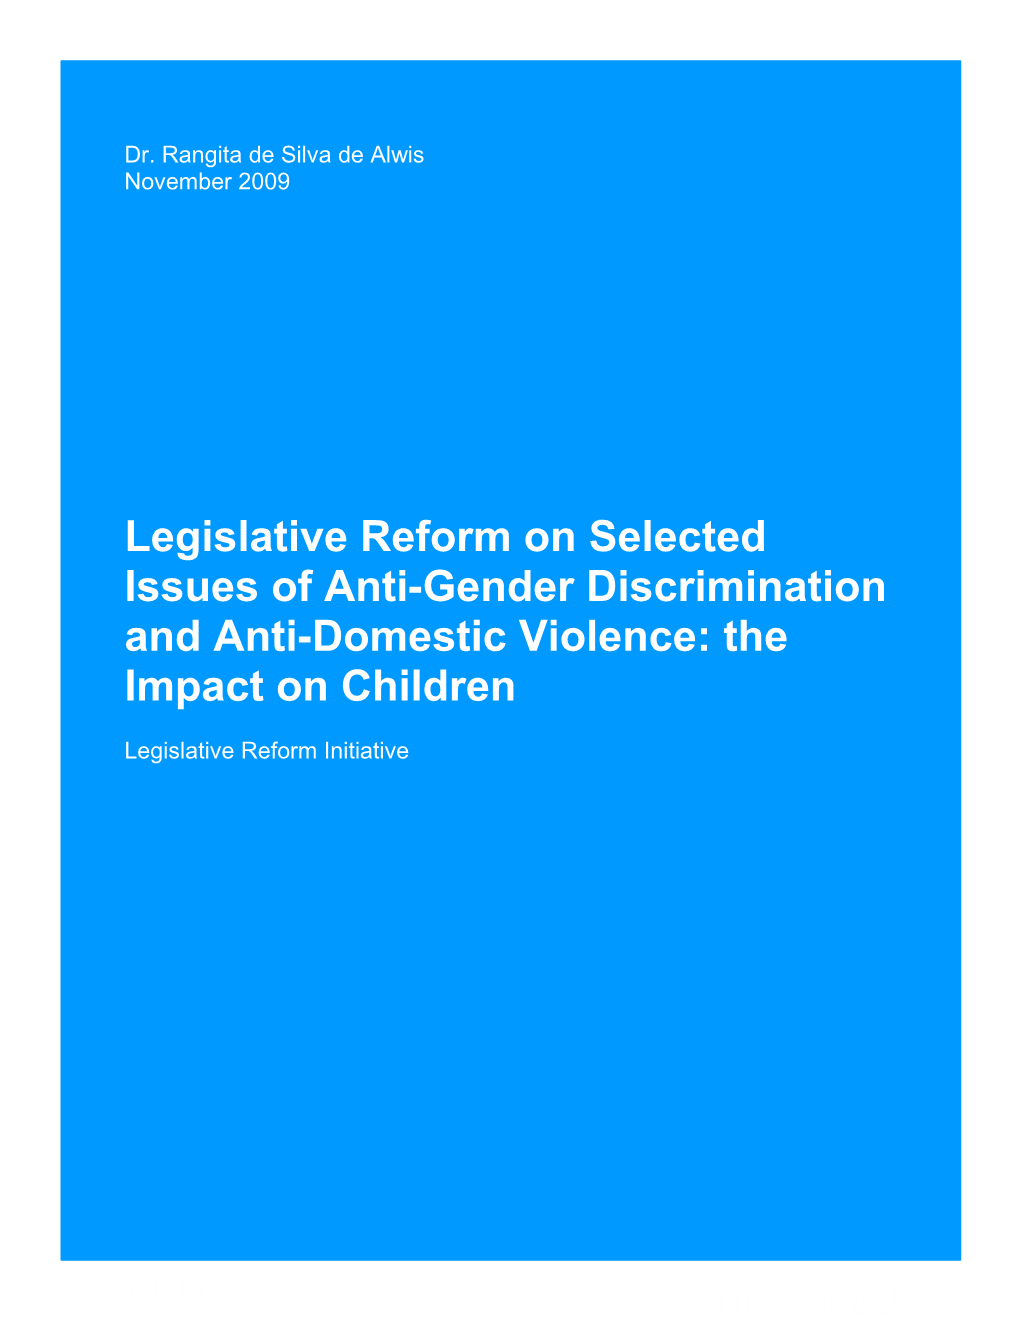 Legislative Reform on Selected Issues of Anti-Gender Discrimination and Anti-Domestic